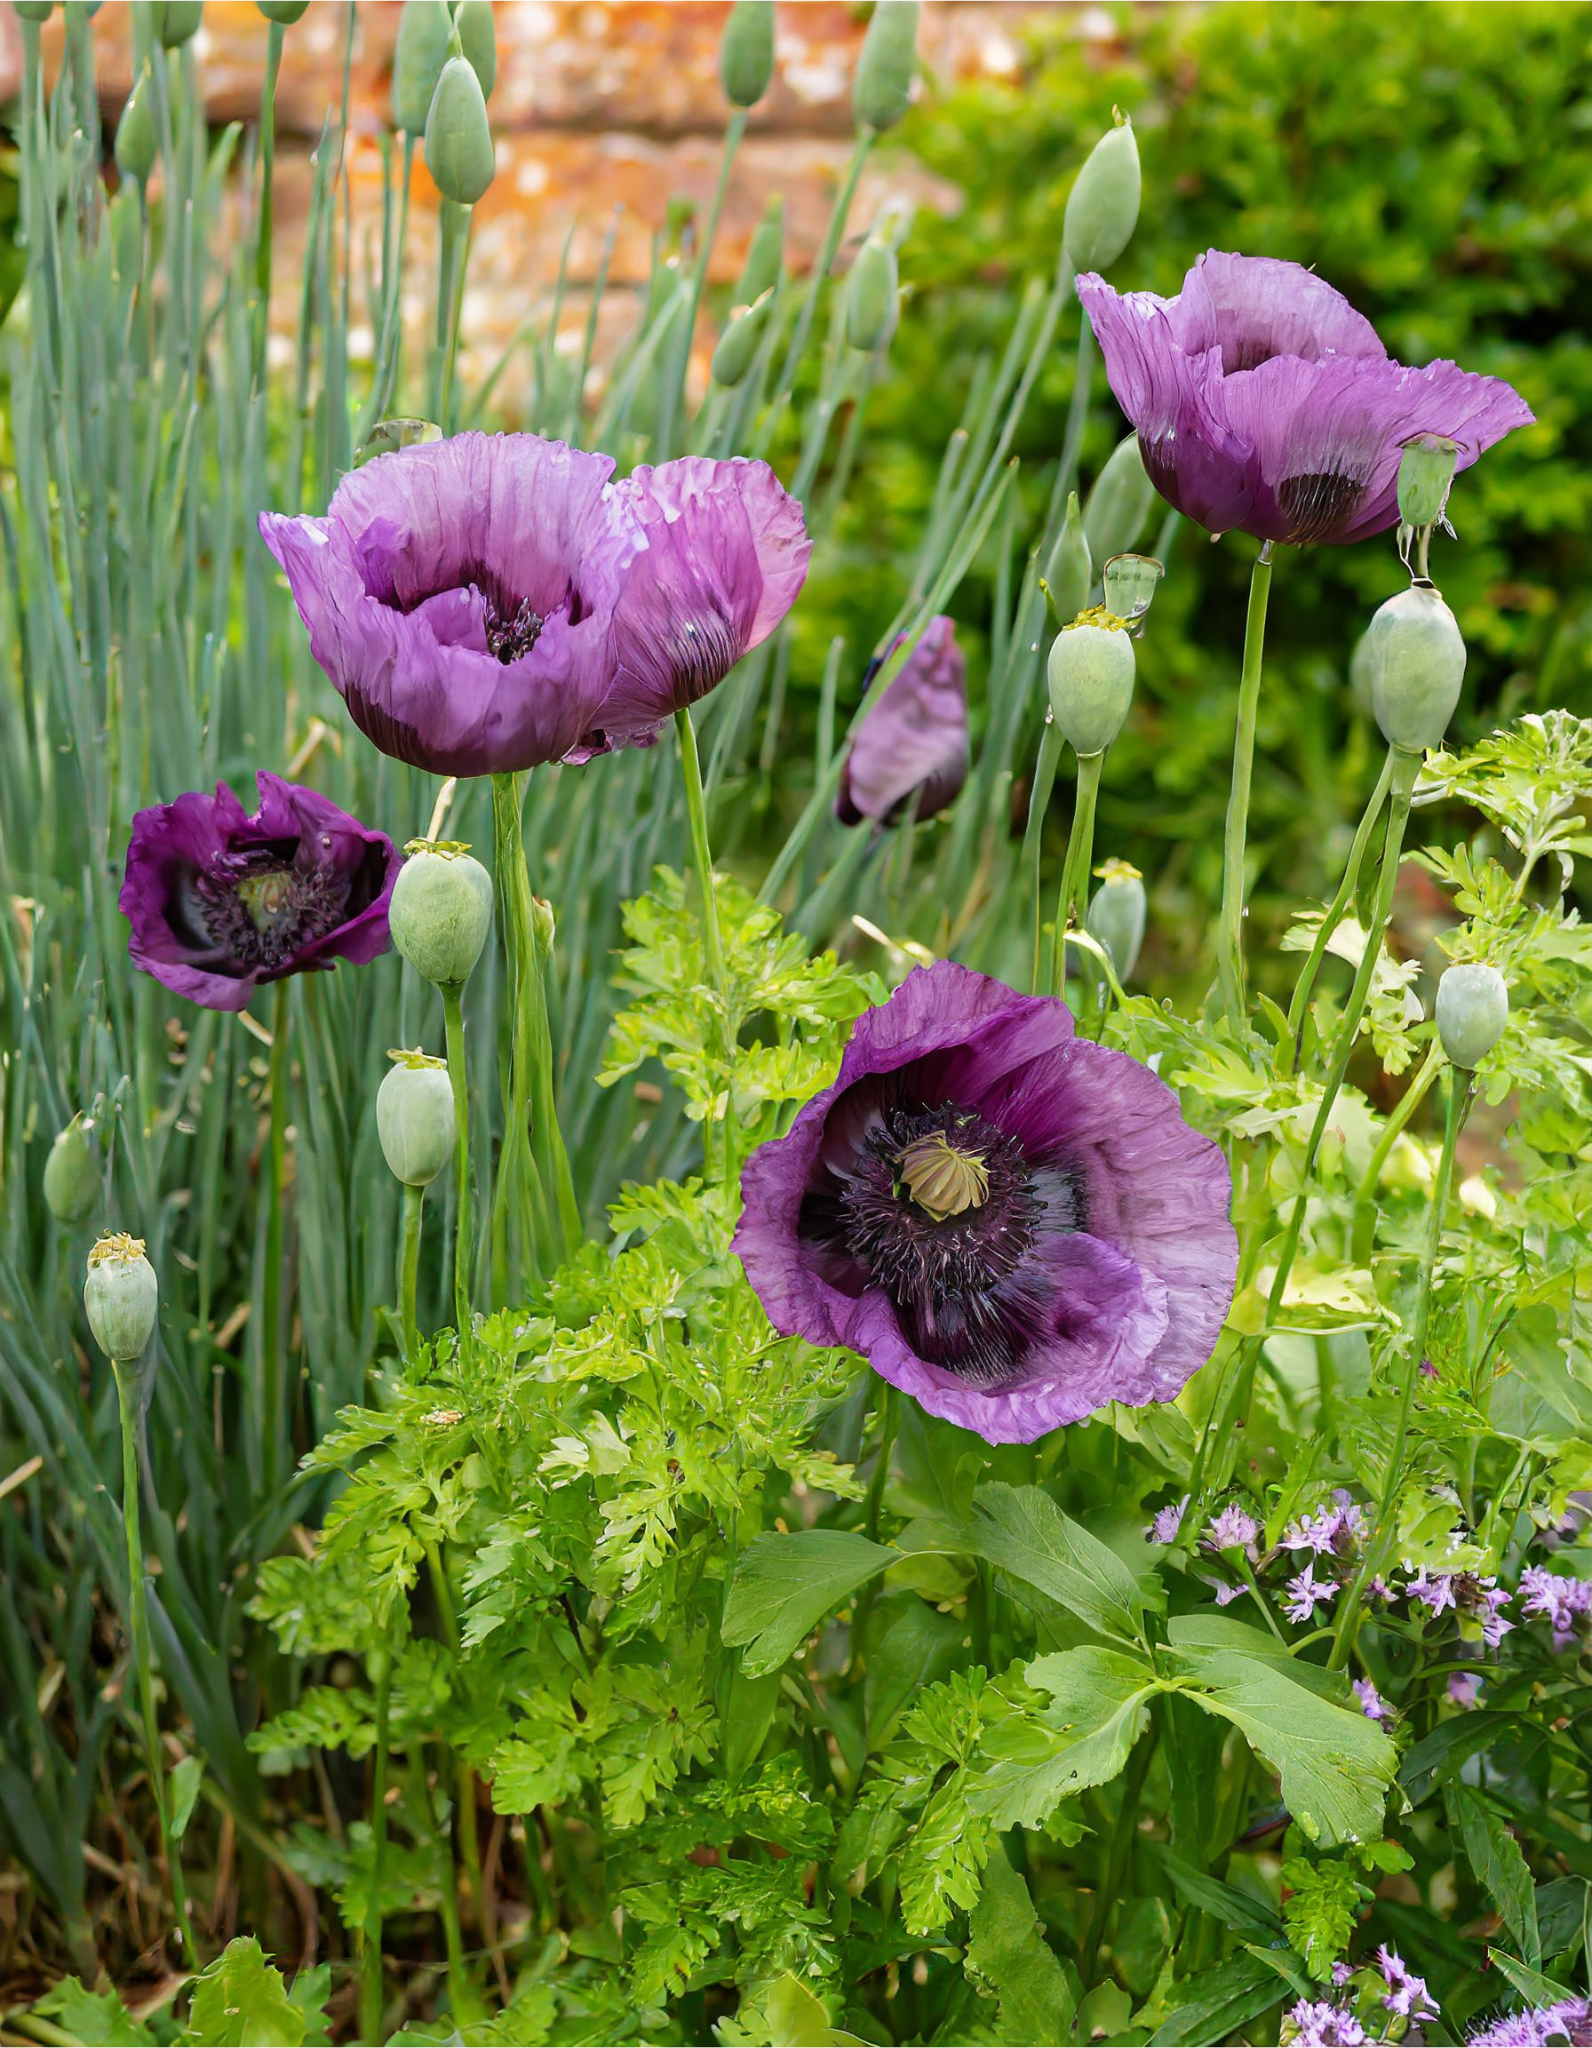 Poppies and chives